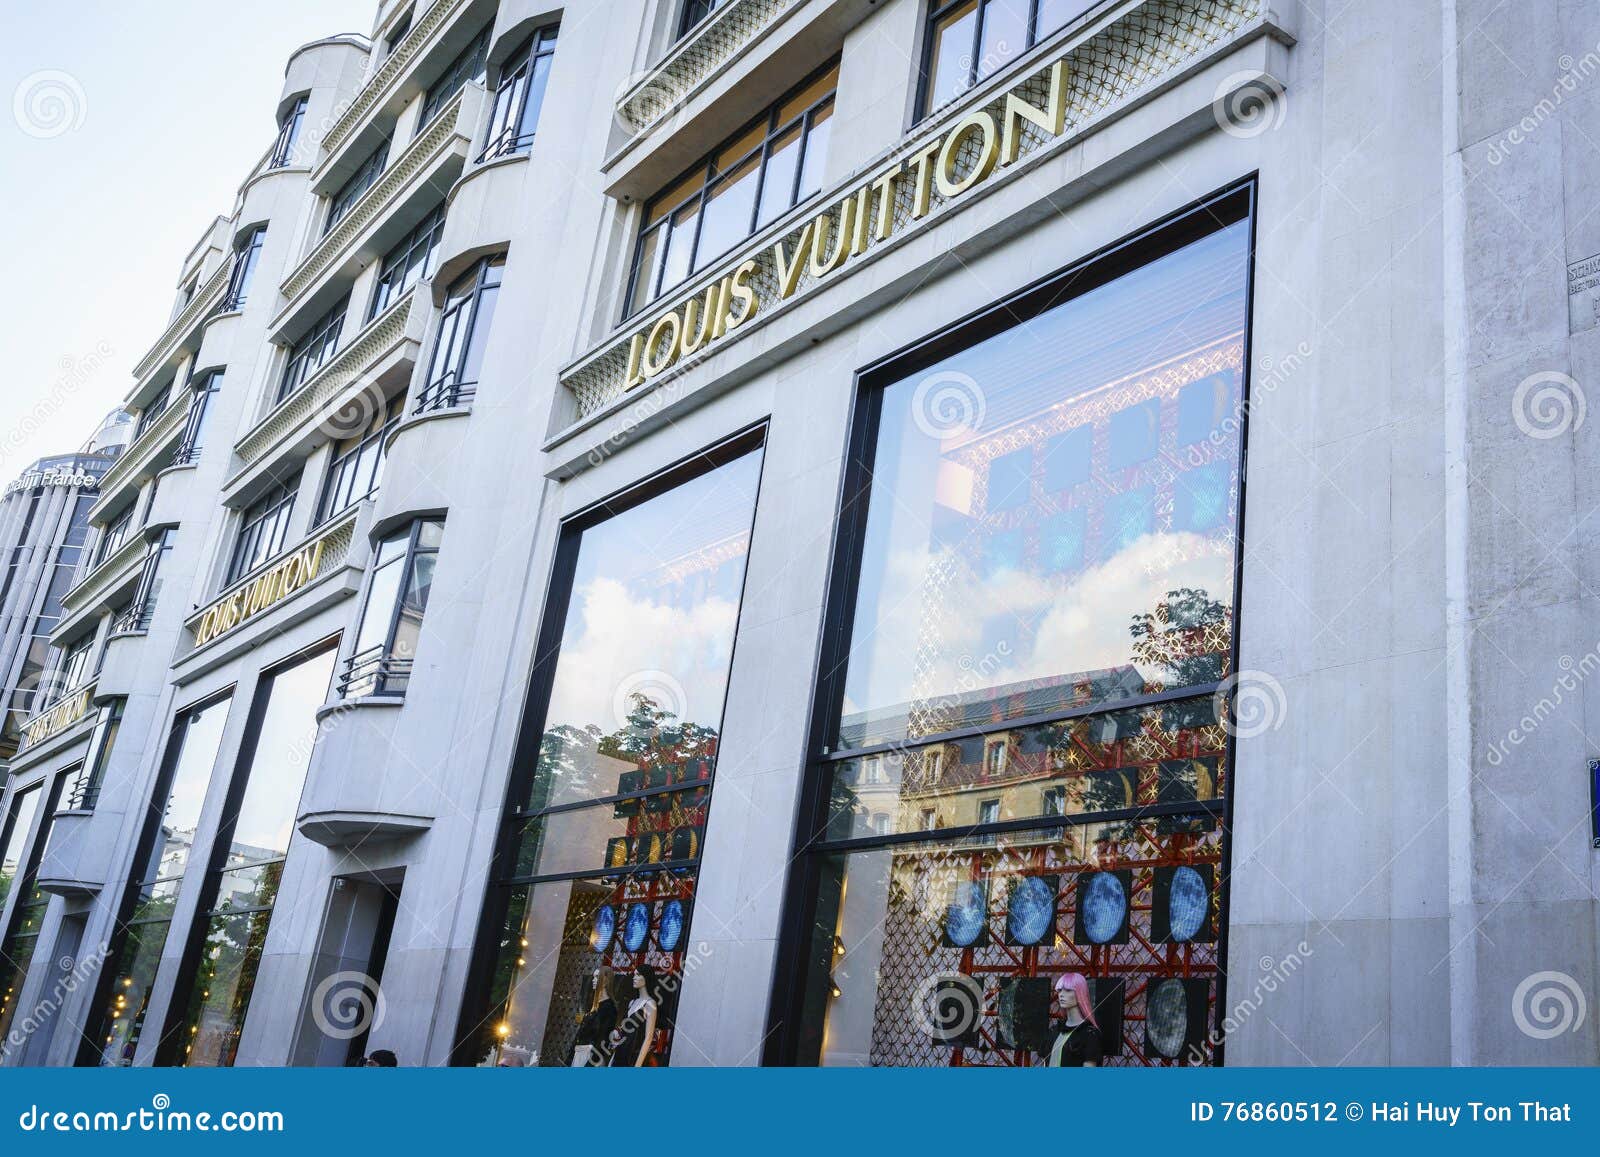 Logo of Louis Vuitton Flagship Store Editorial Stock Image - Image of  luxury, shop: 120181049